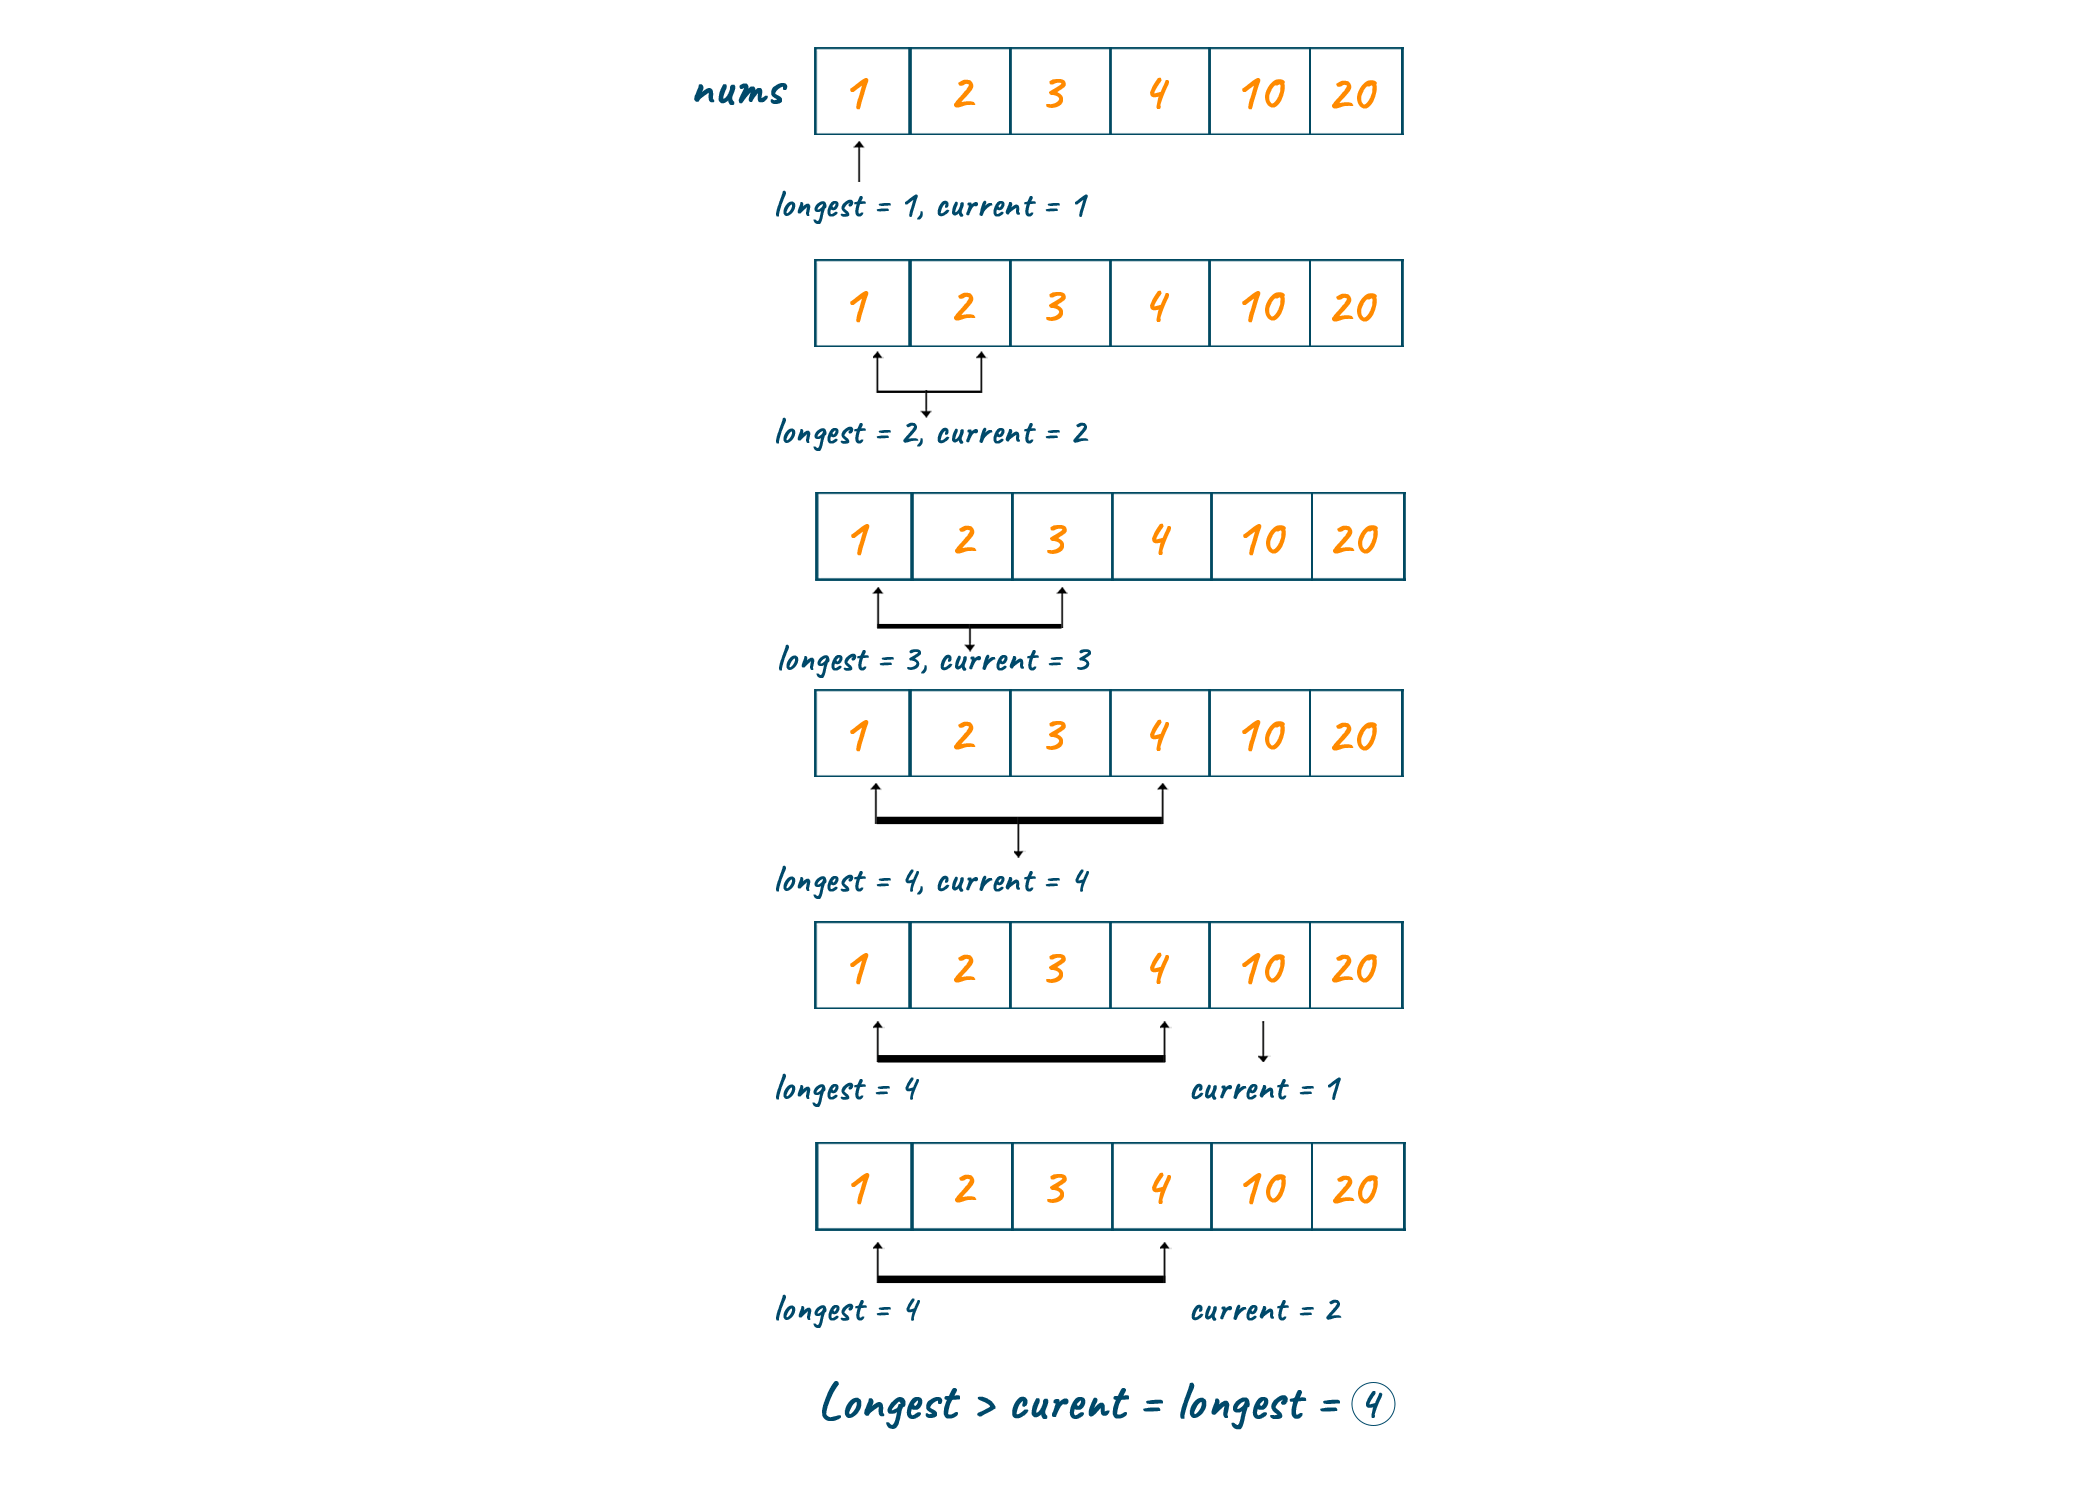 Final output of longest consecutive sequence